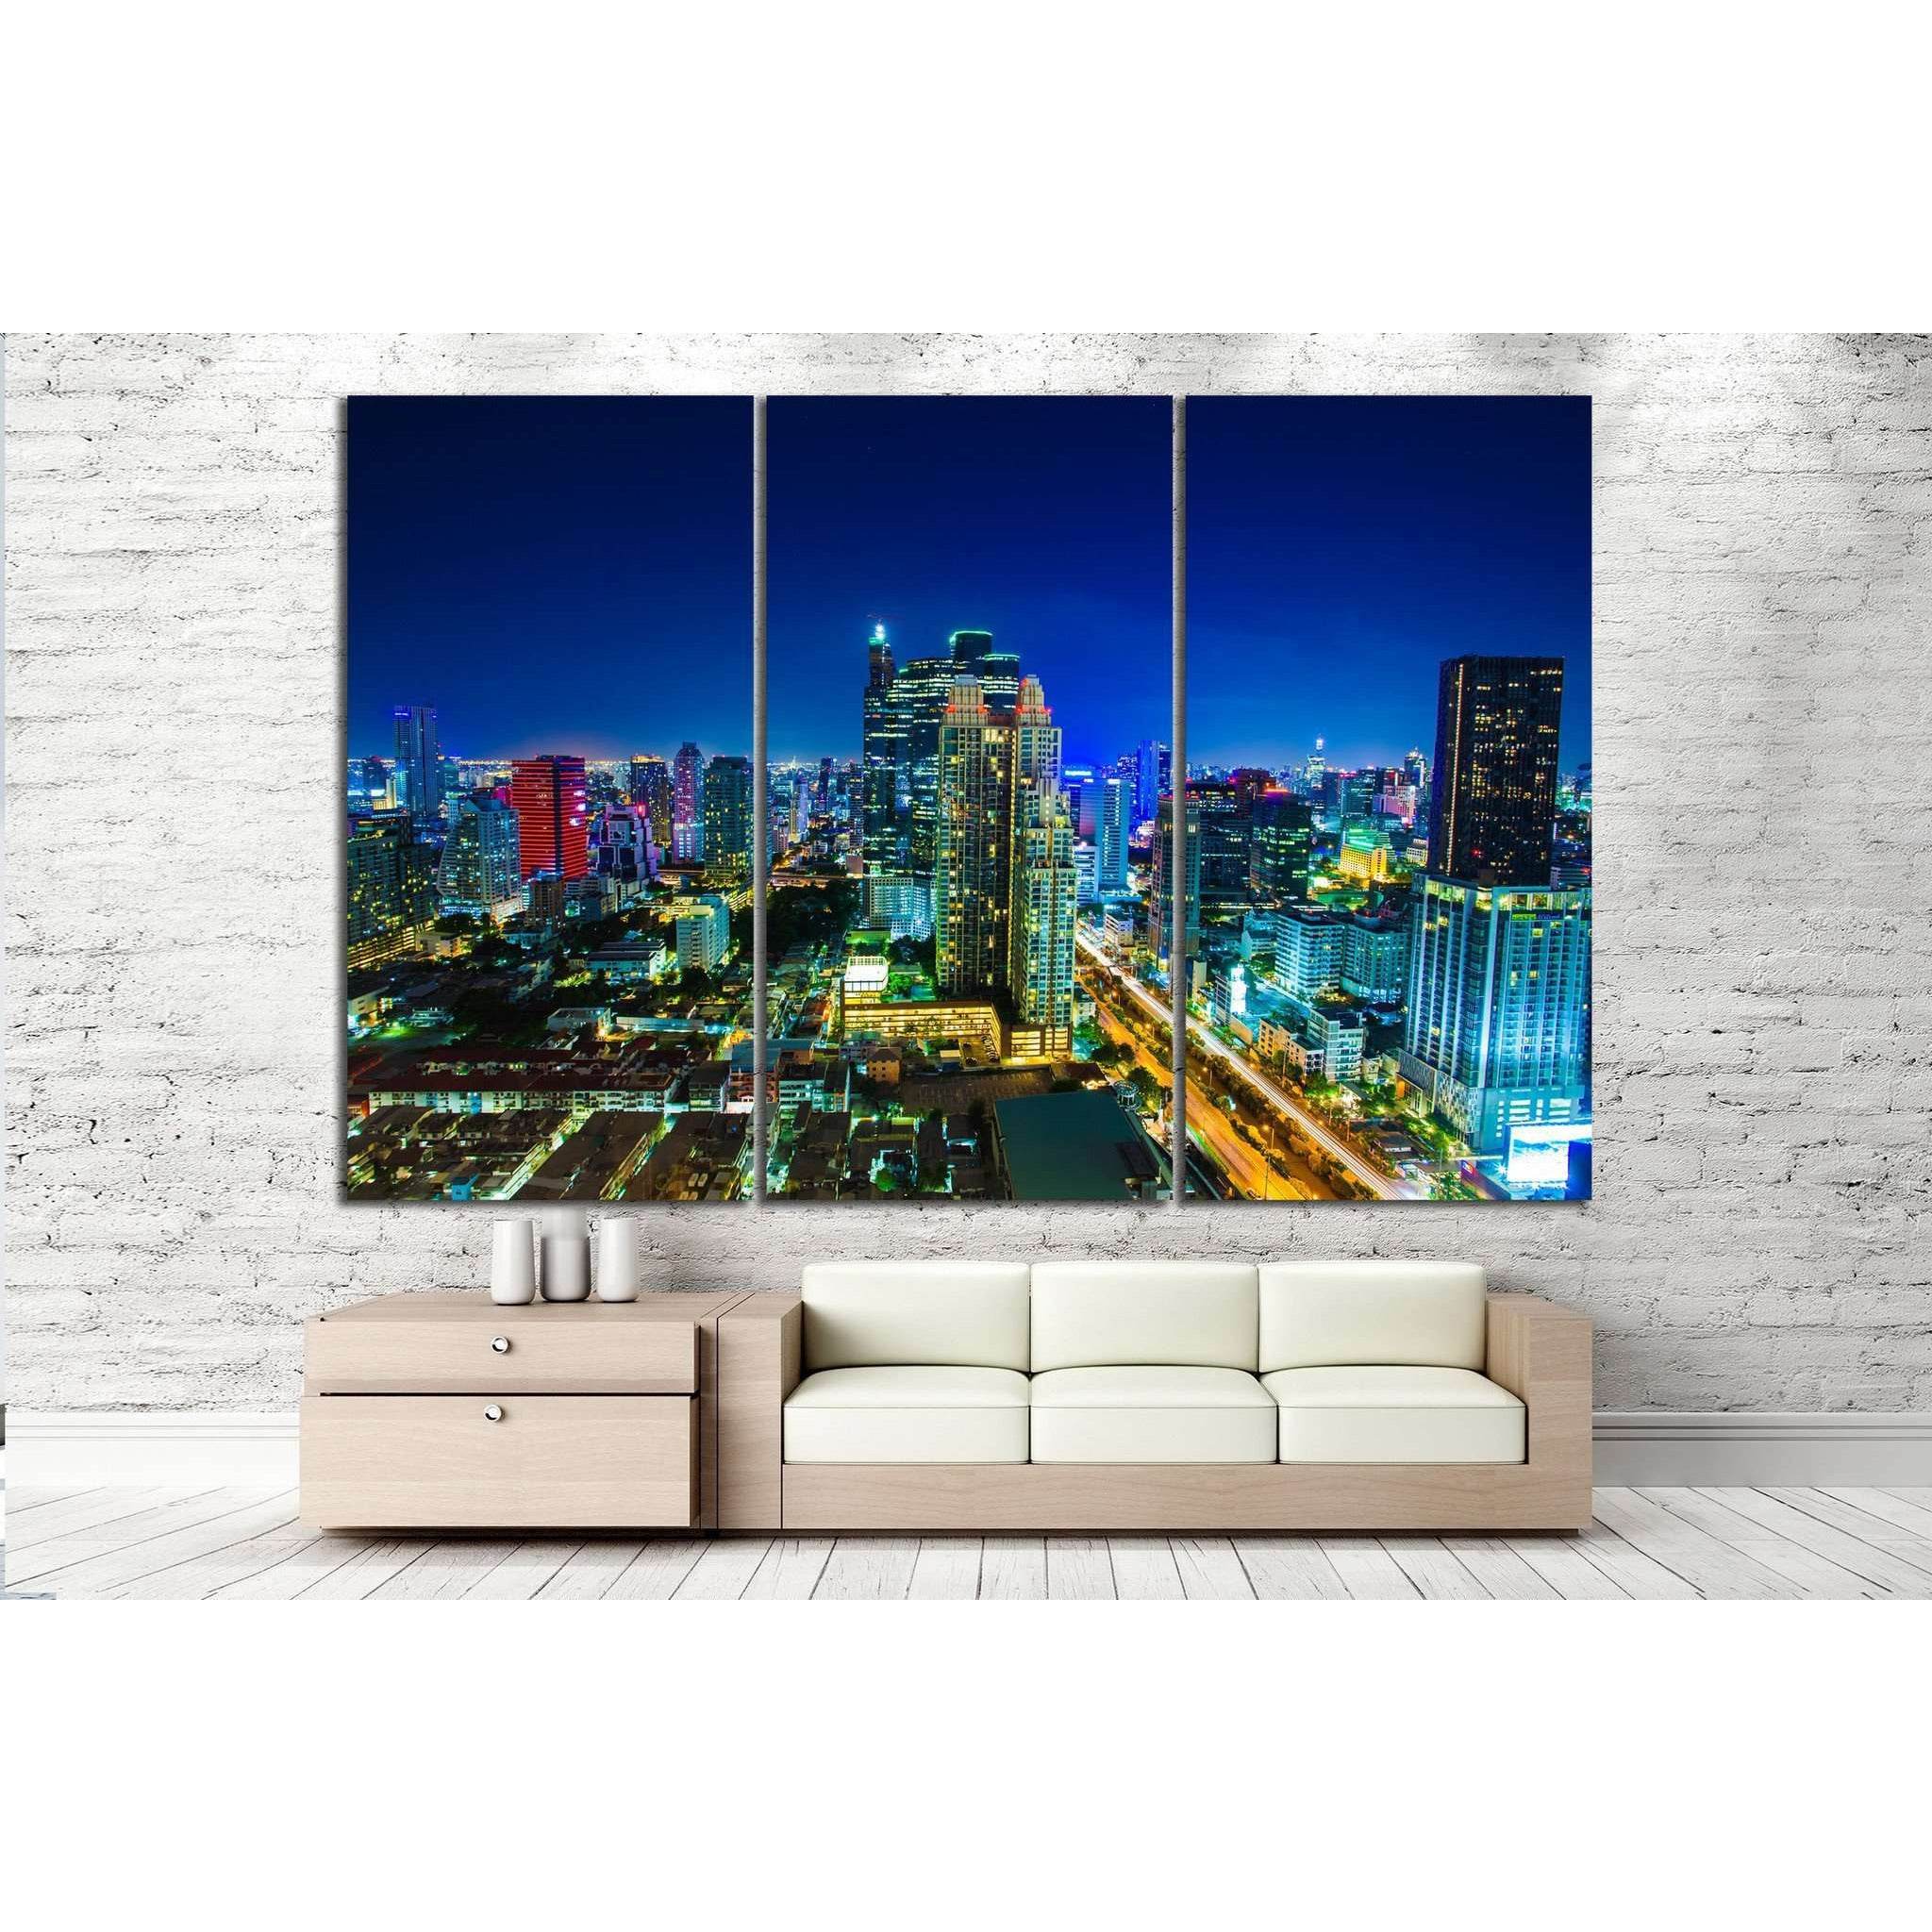 night landscape buildings №995 Ready to Hang Canvas Print